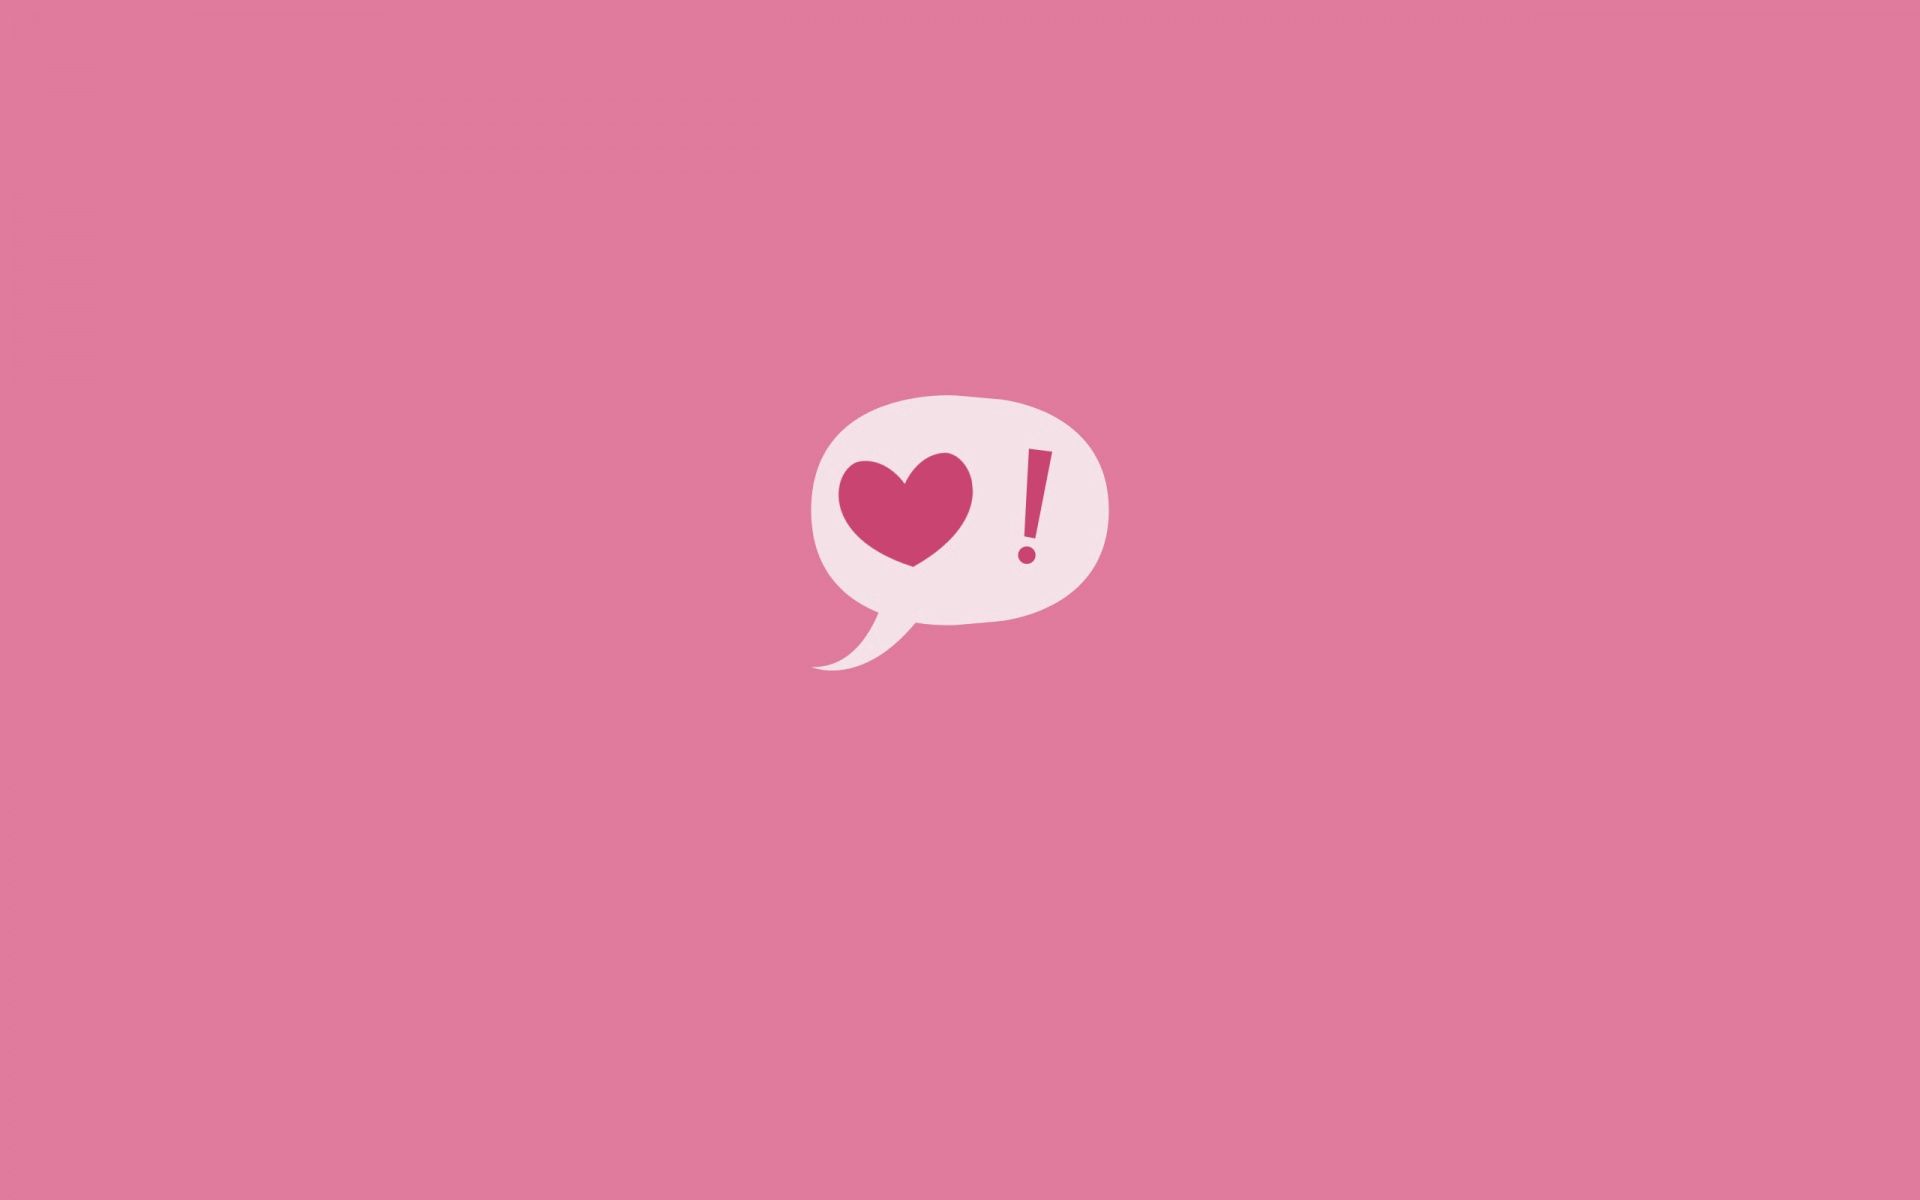 137925 download wallpaper heart, pink, minimalism, sign, exclamation screensavers and pictures for free